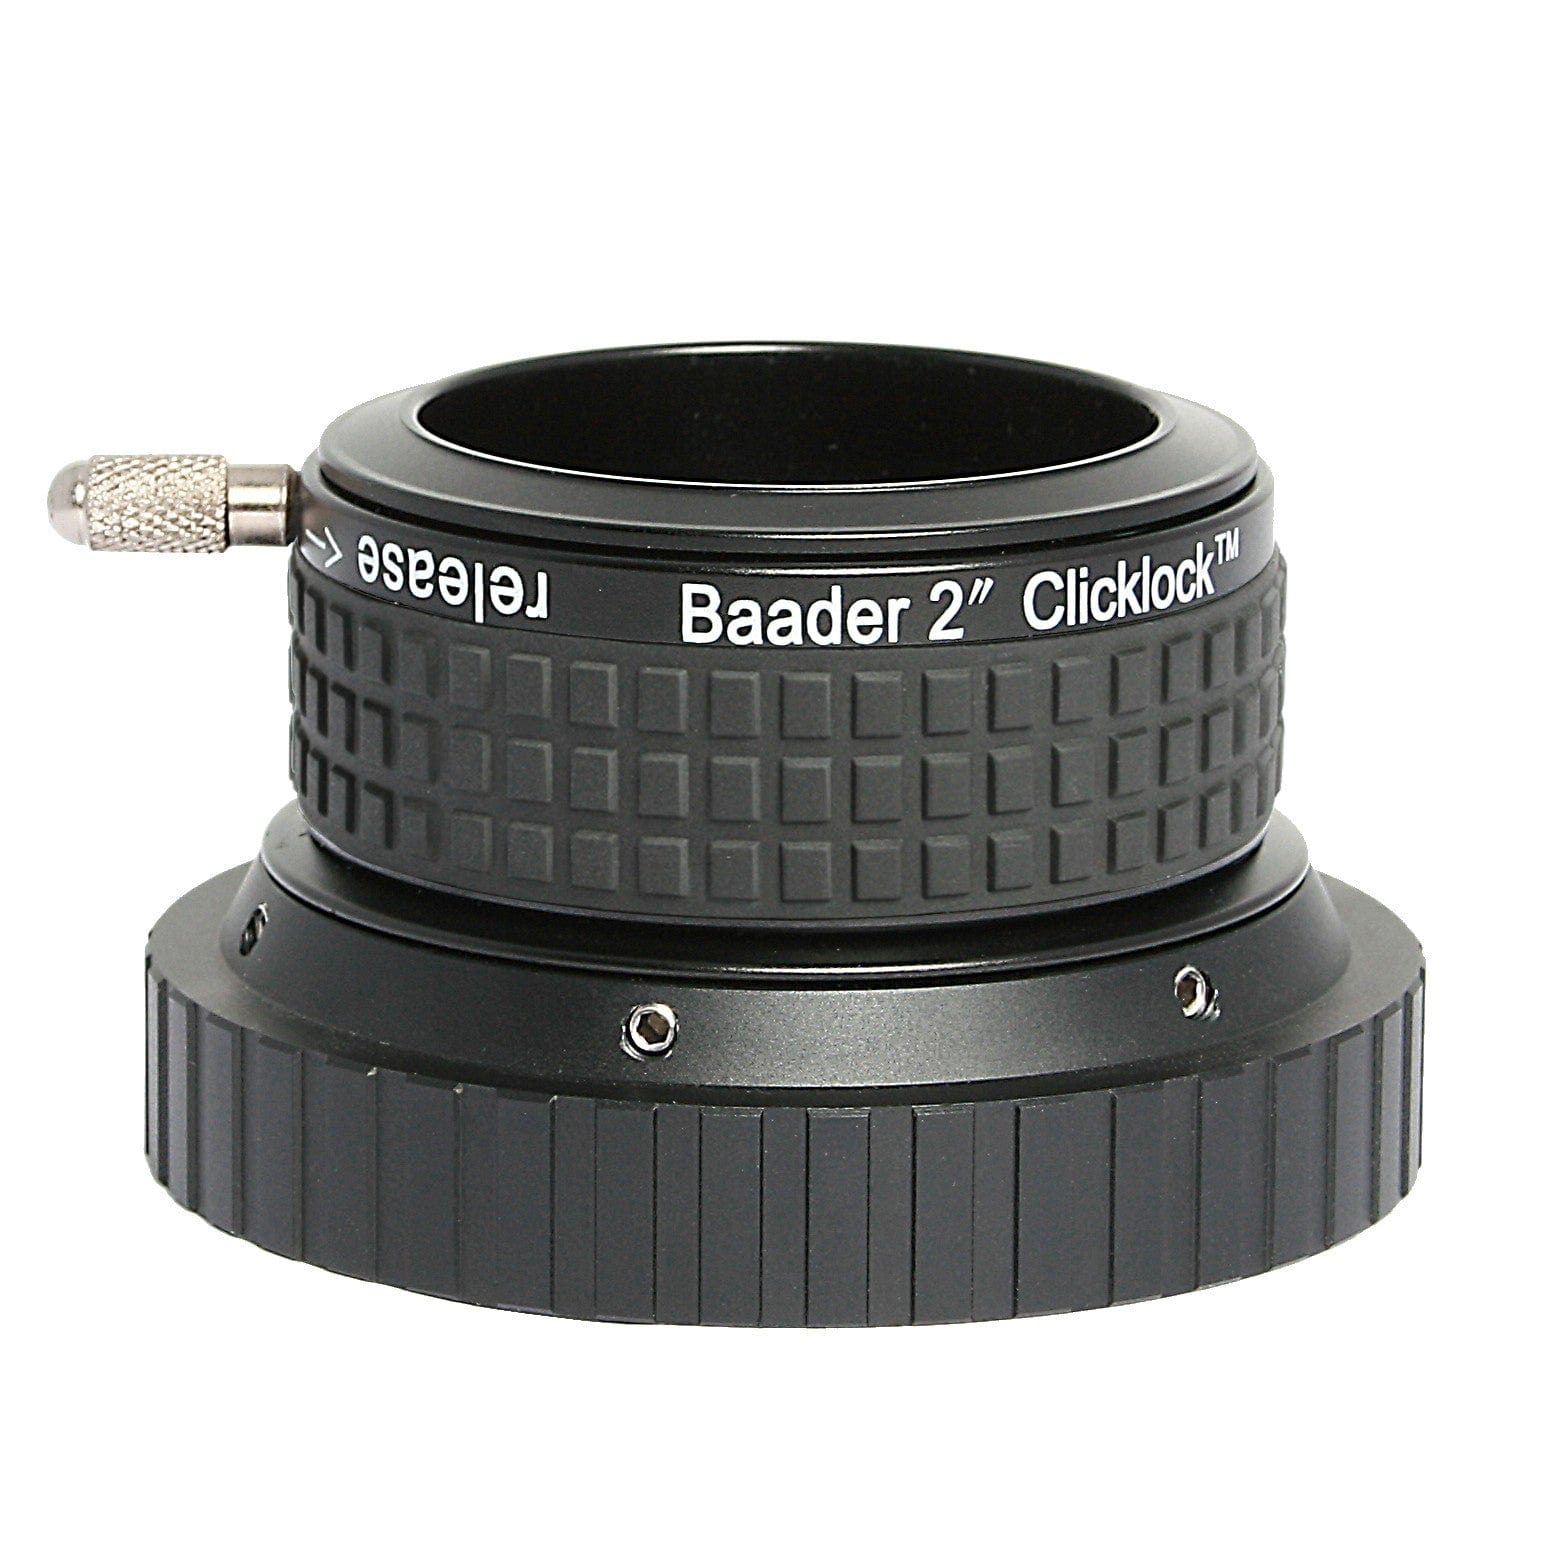 Baader Planetarium Accessory Baader 2" Clicklock Clamp for Large SCT (internal 3.3" Thread, for C11/C14) - 2956233